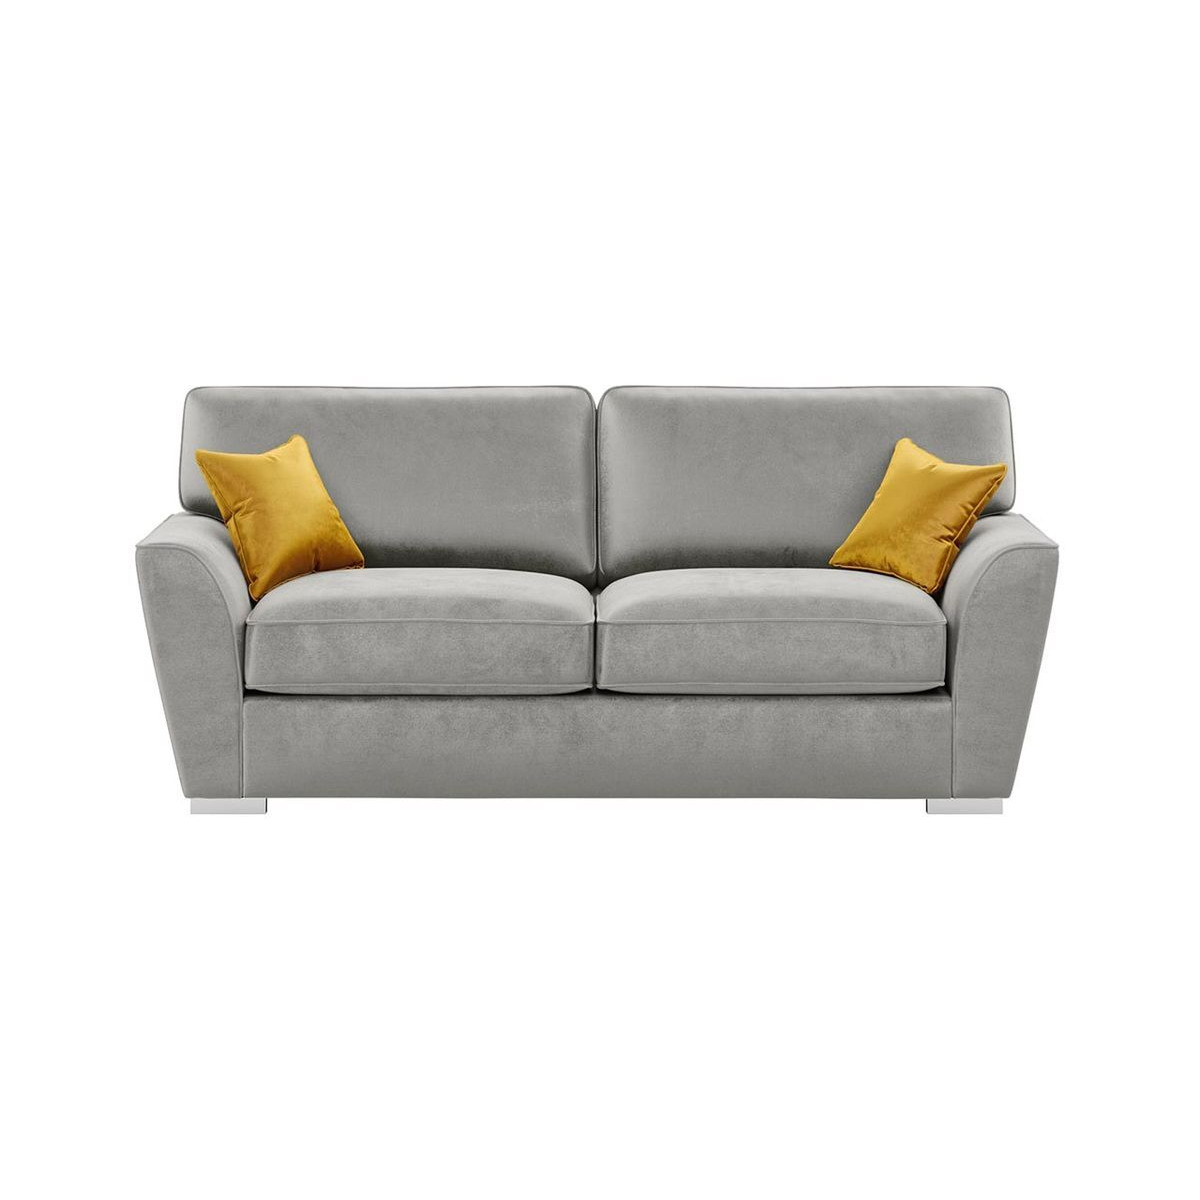 Majestic 3 Seater Sofa with Fitted Back Cushions, silver/mustard - image 1